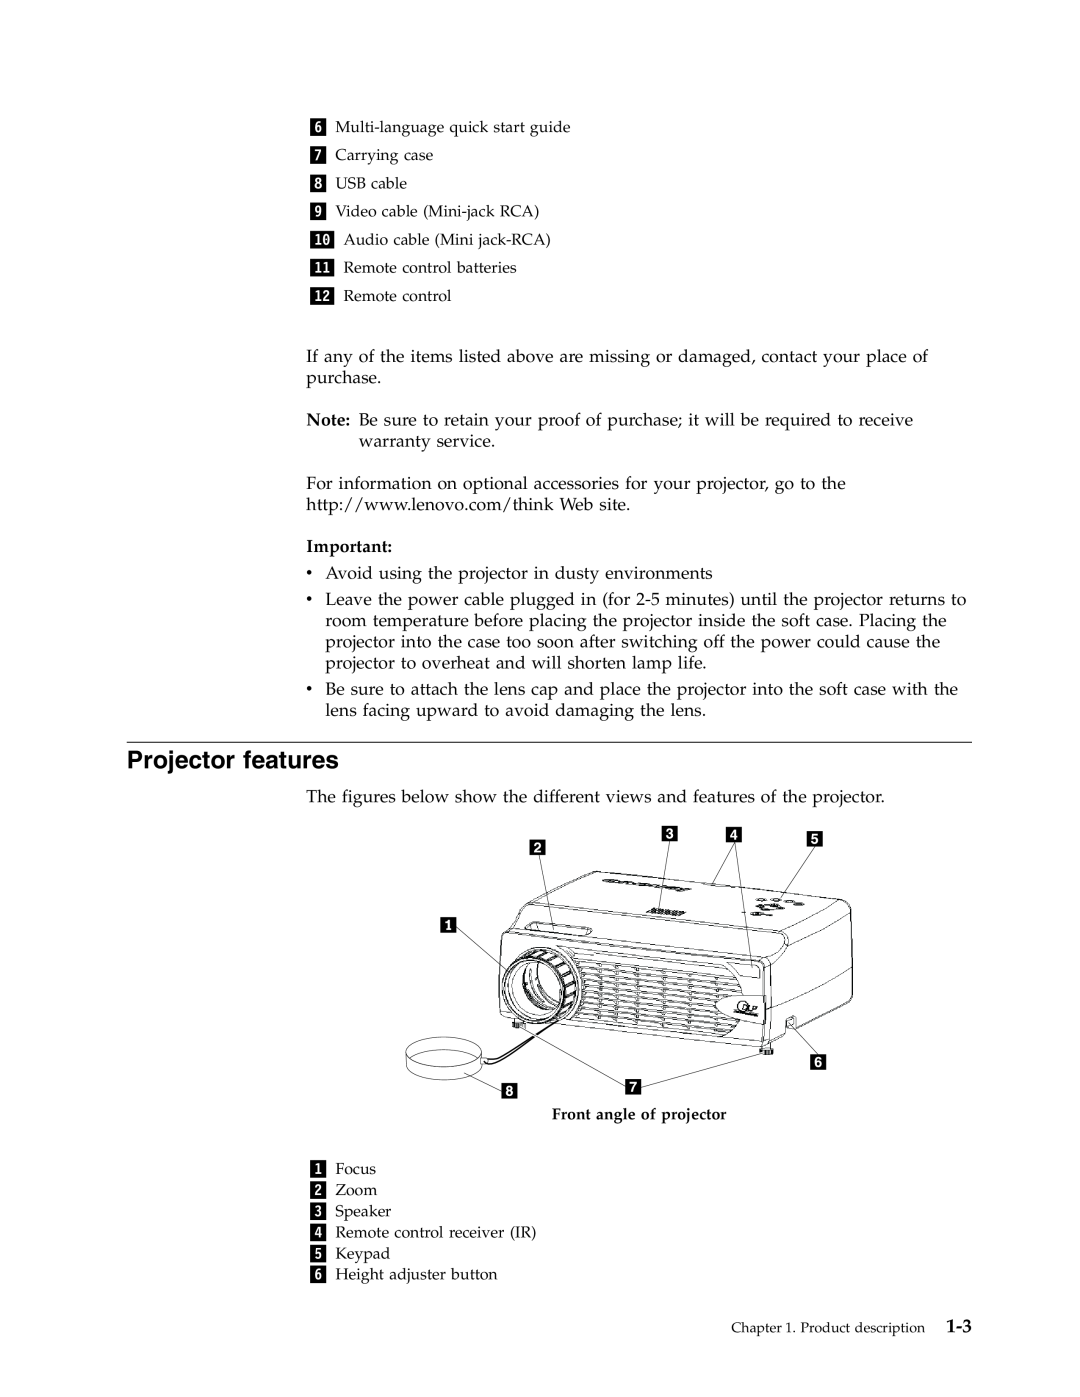 Lenovo C400 manual Projector features 